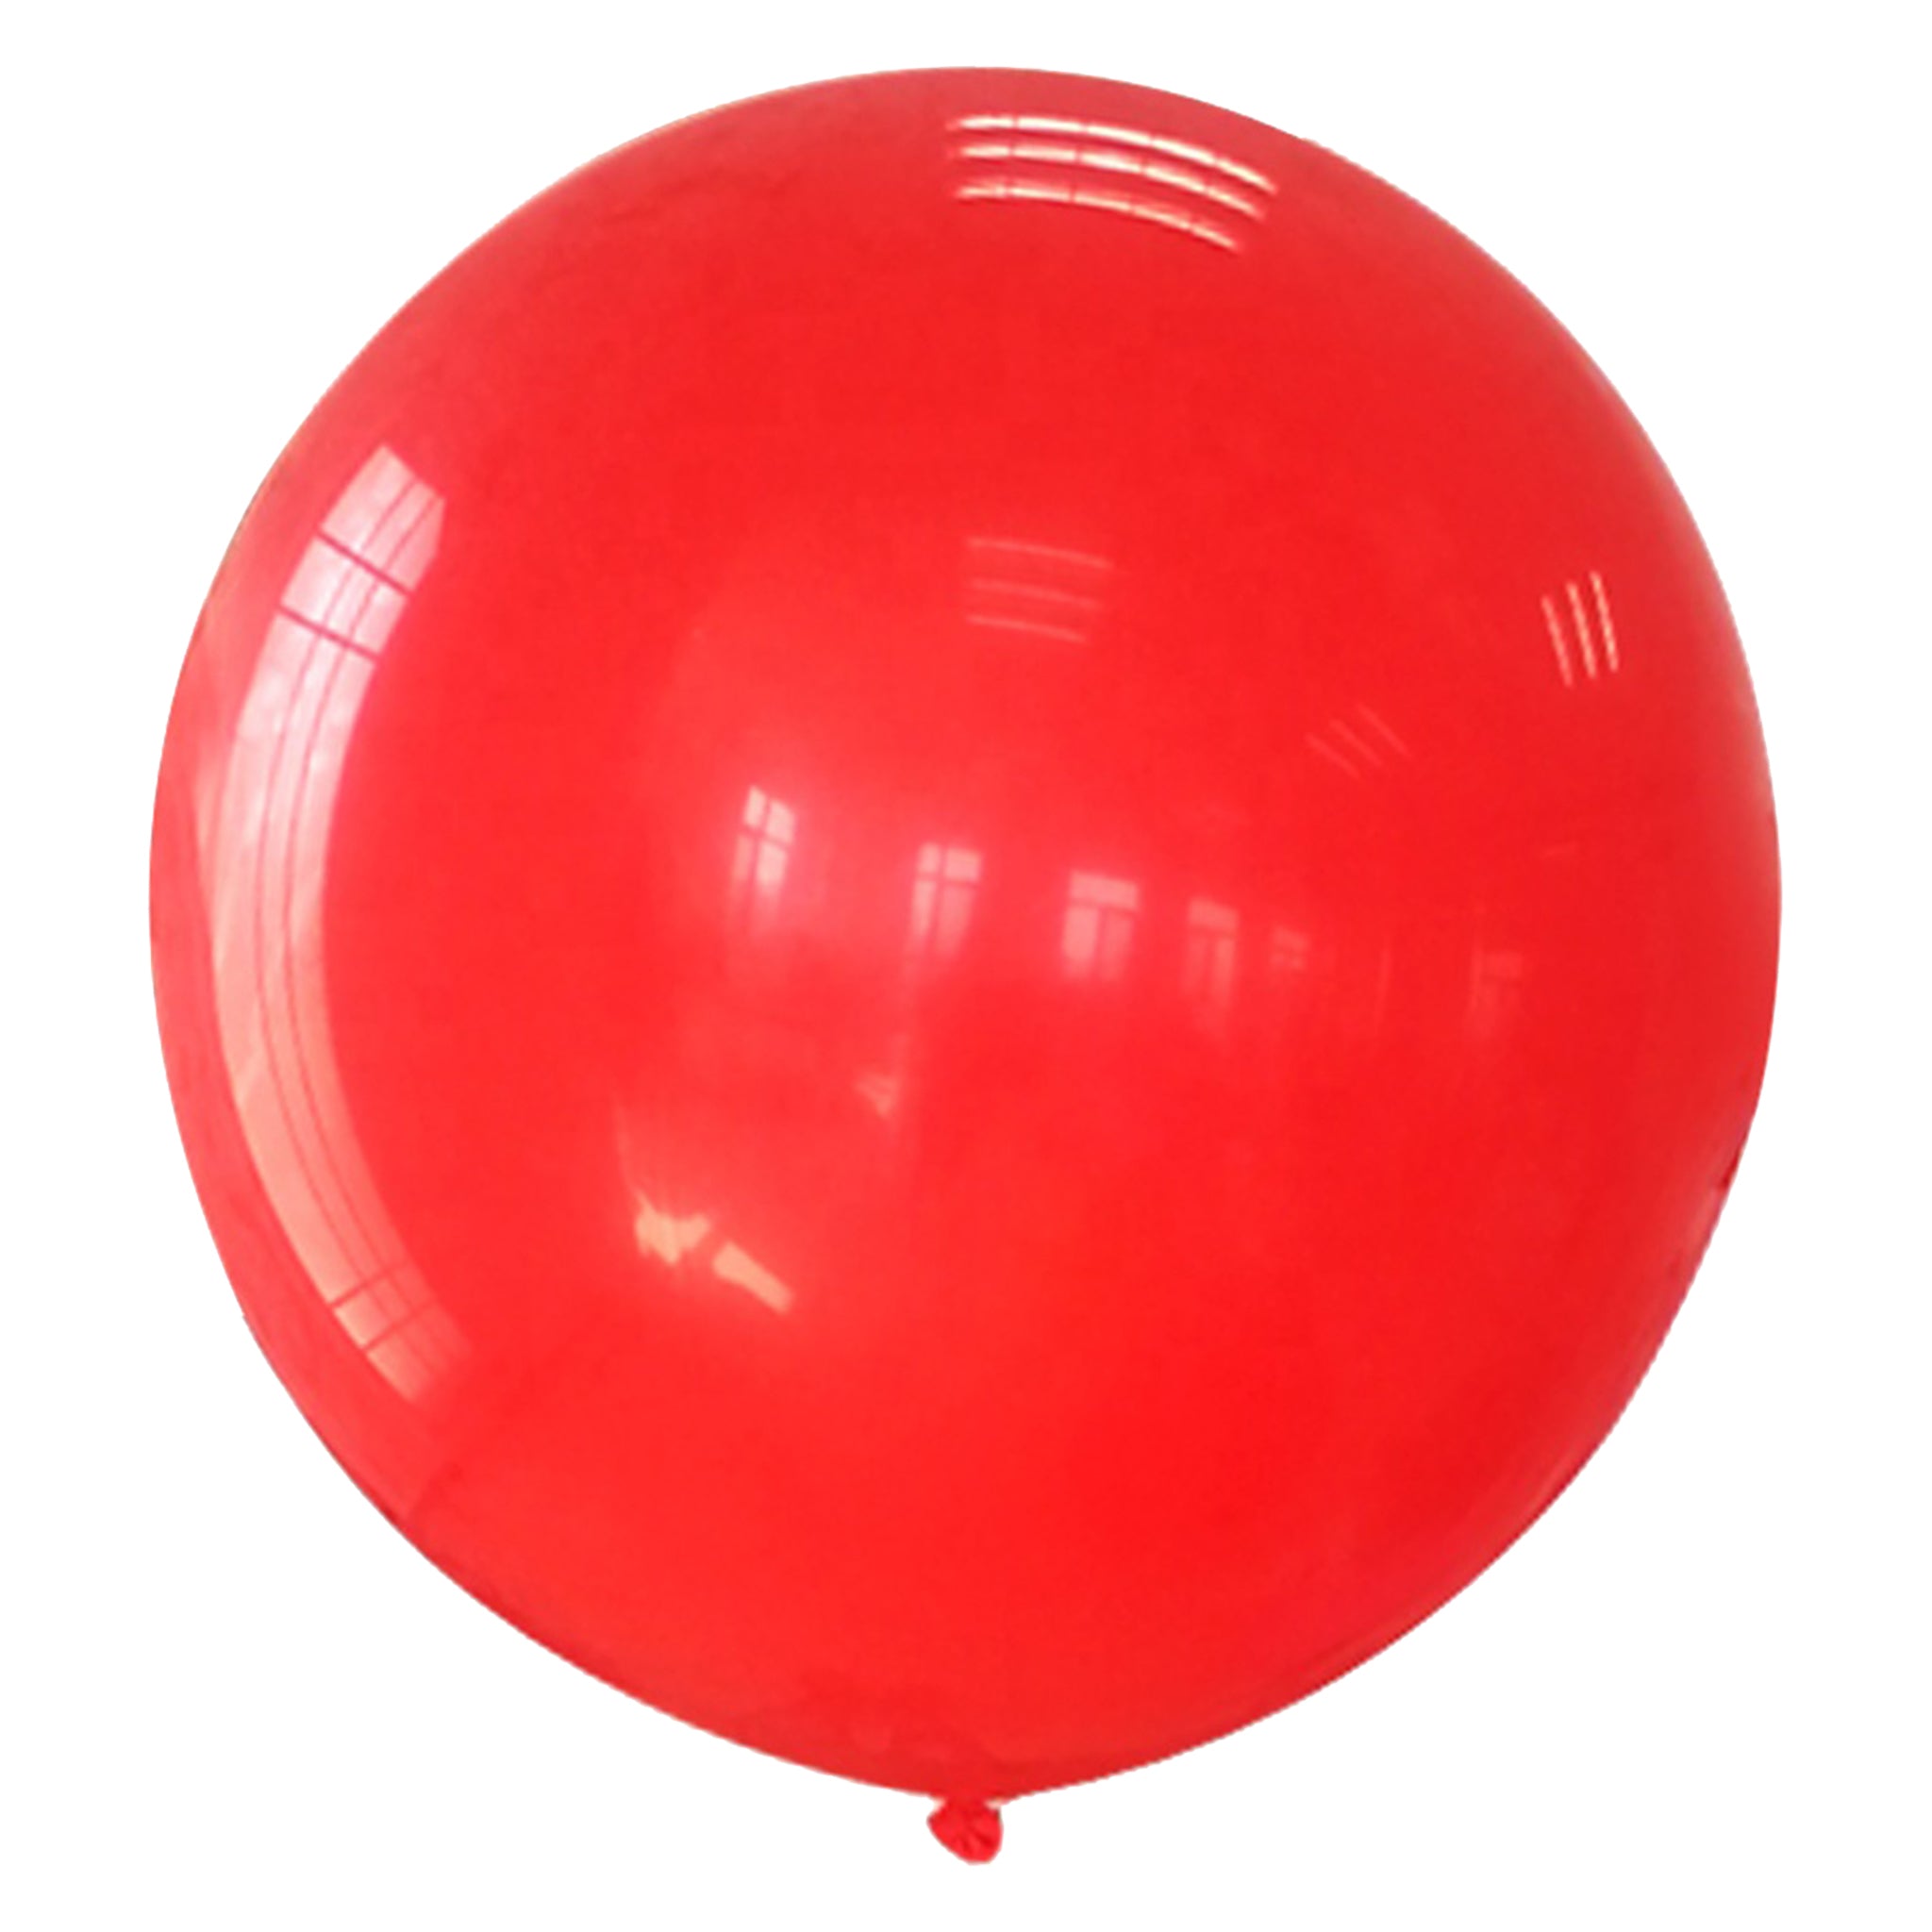 red 36 inches big sized latex balloons for sale online in Dubai